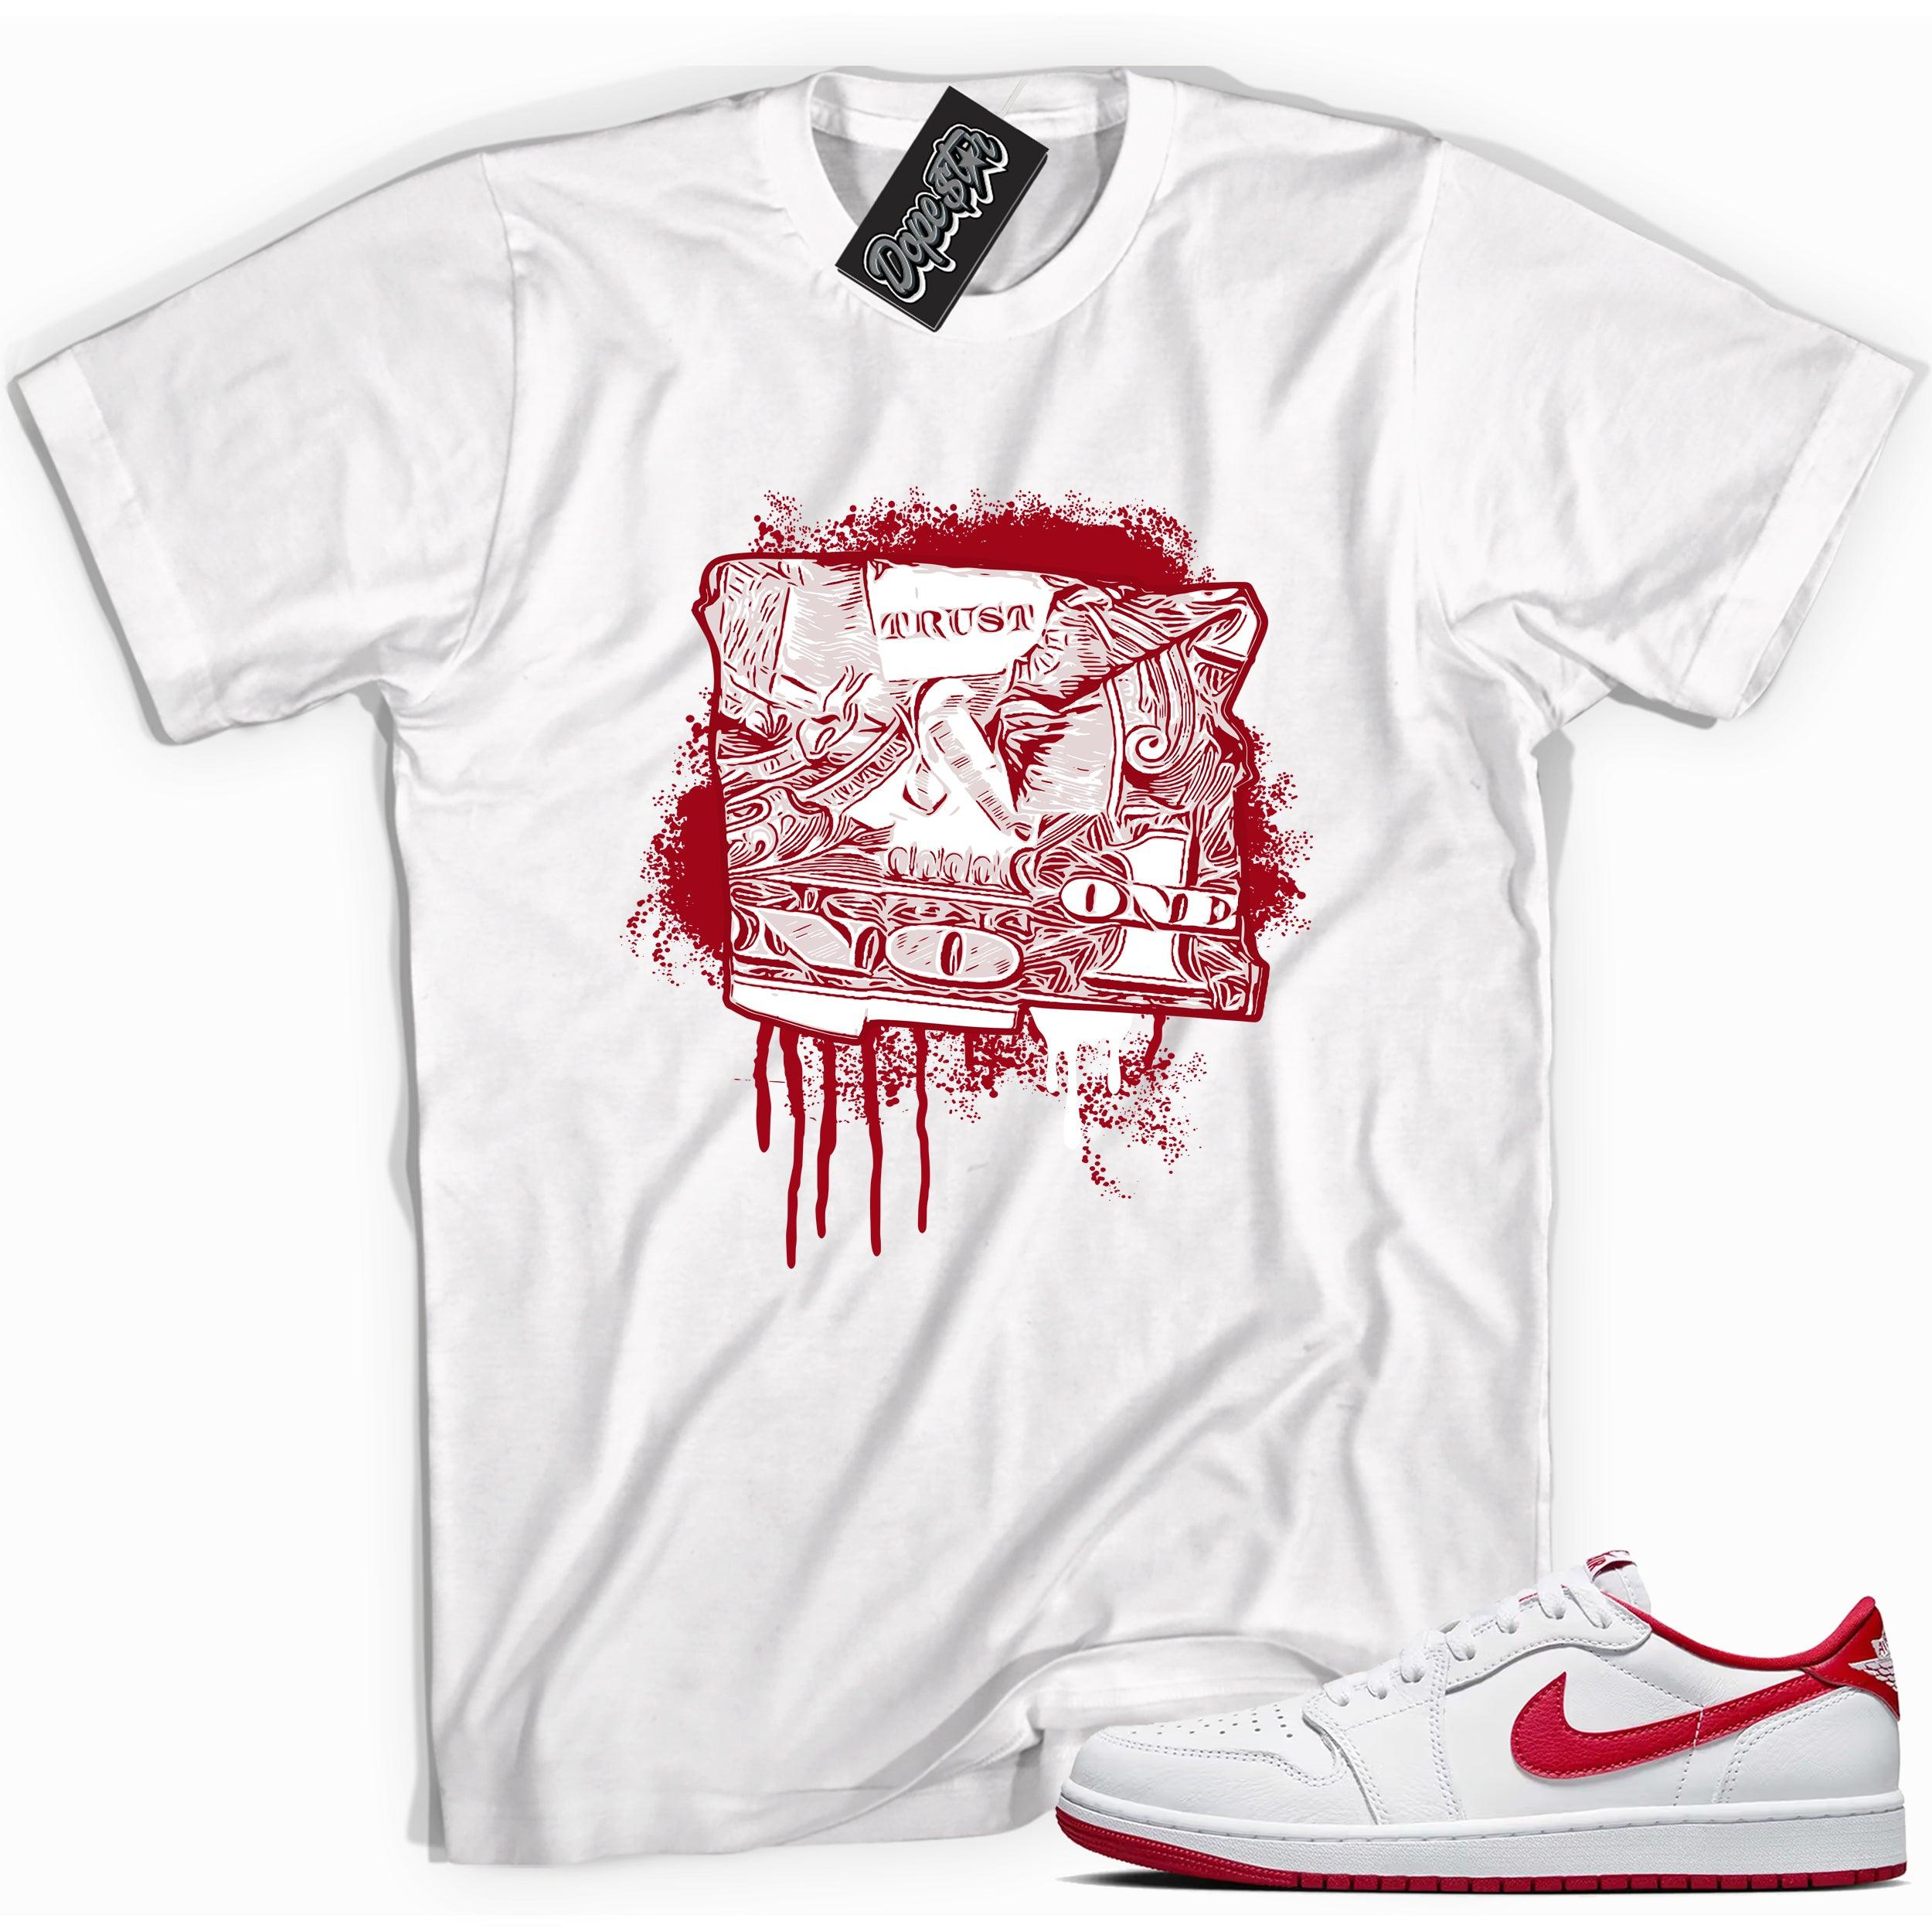 Cool White graphic tee with “ Trust No One Dollar ” print, that perfectly matches Air Jordan 1 Retro Low OG University Red and white sneakers 